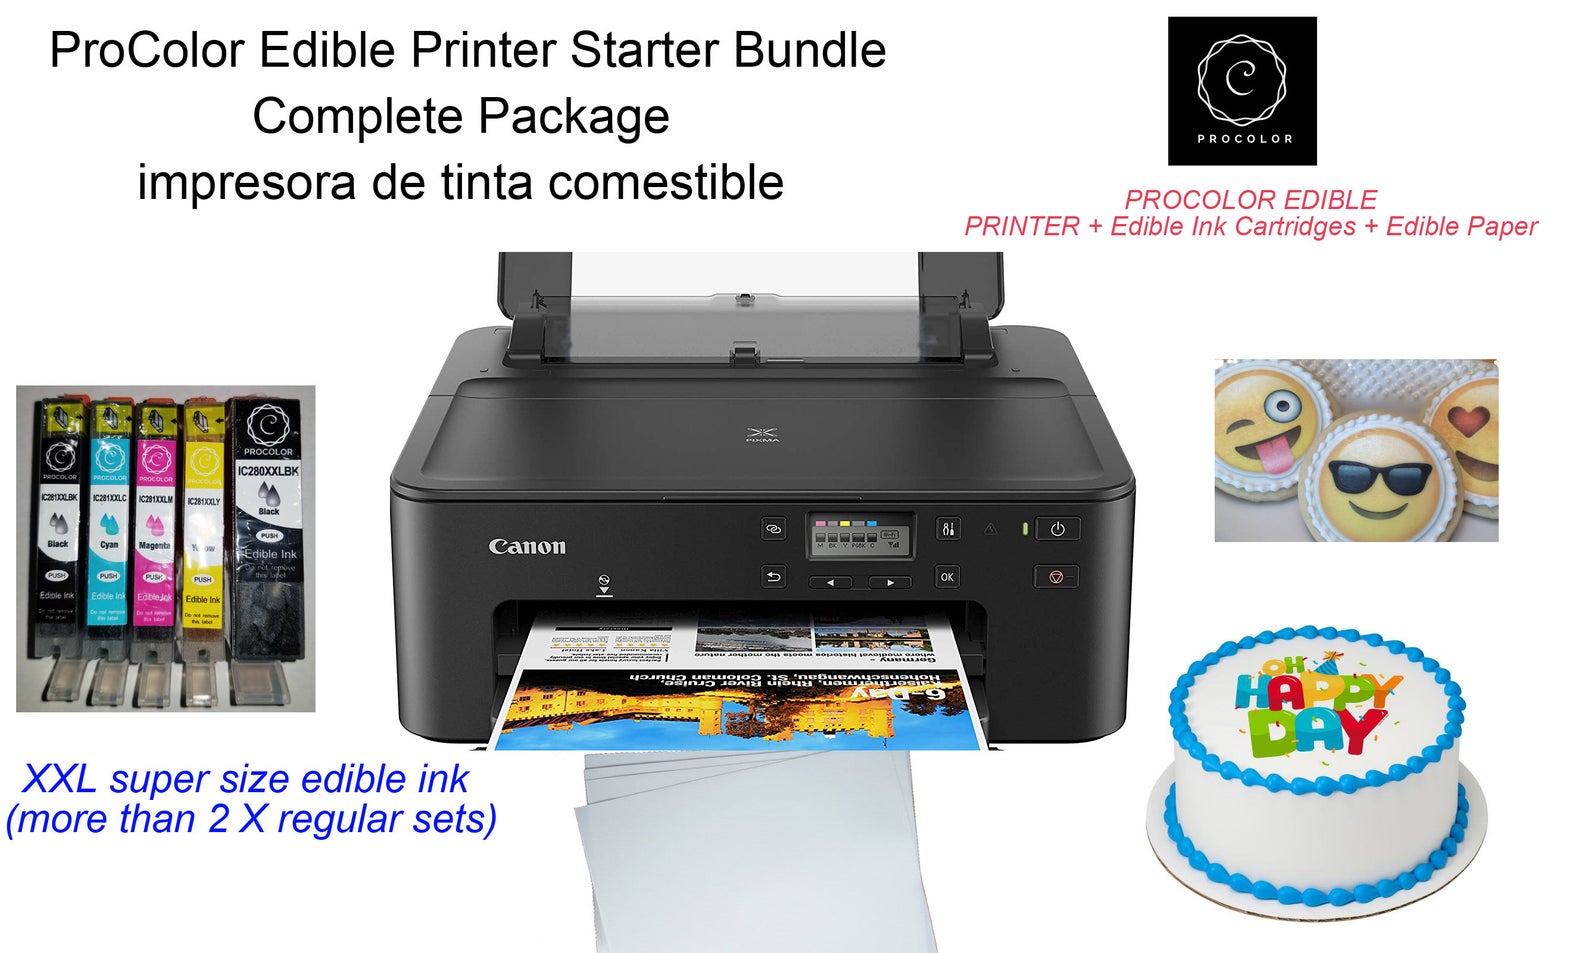 skelet adgang Guggenheim Museum ProColor Edible Printer Bundle with Canon wireless printer and XXL edi